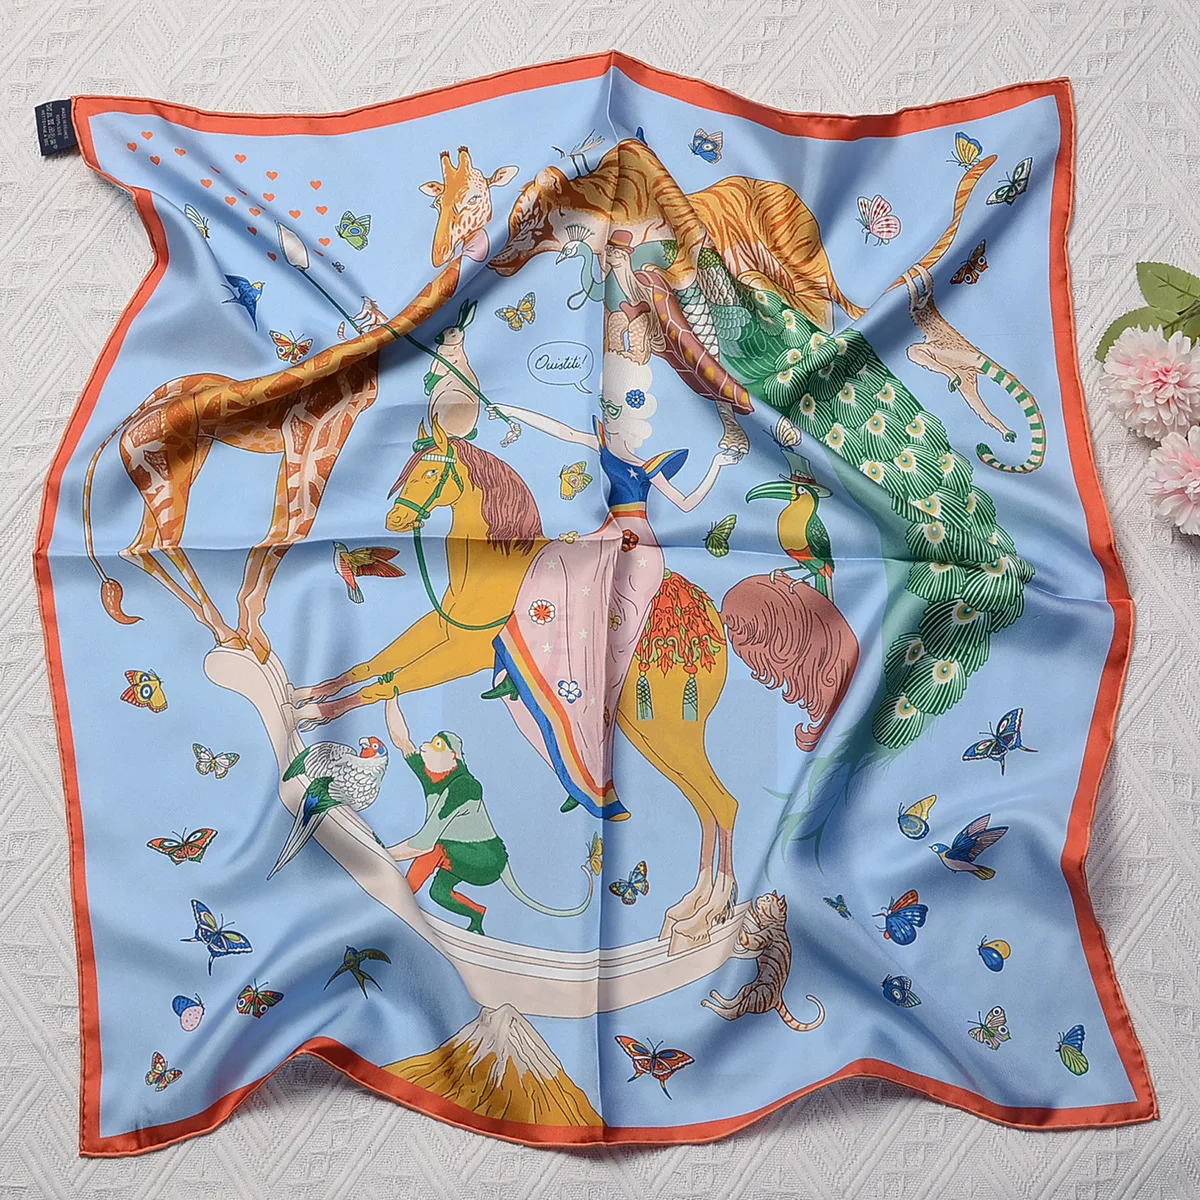 100% Pure Twill Silk Scarf For Ladies Animals Print Square Scarves Small Head Handkerchief Hijab Rolled Wraps Female Bow Ties